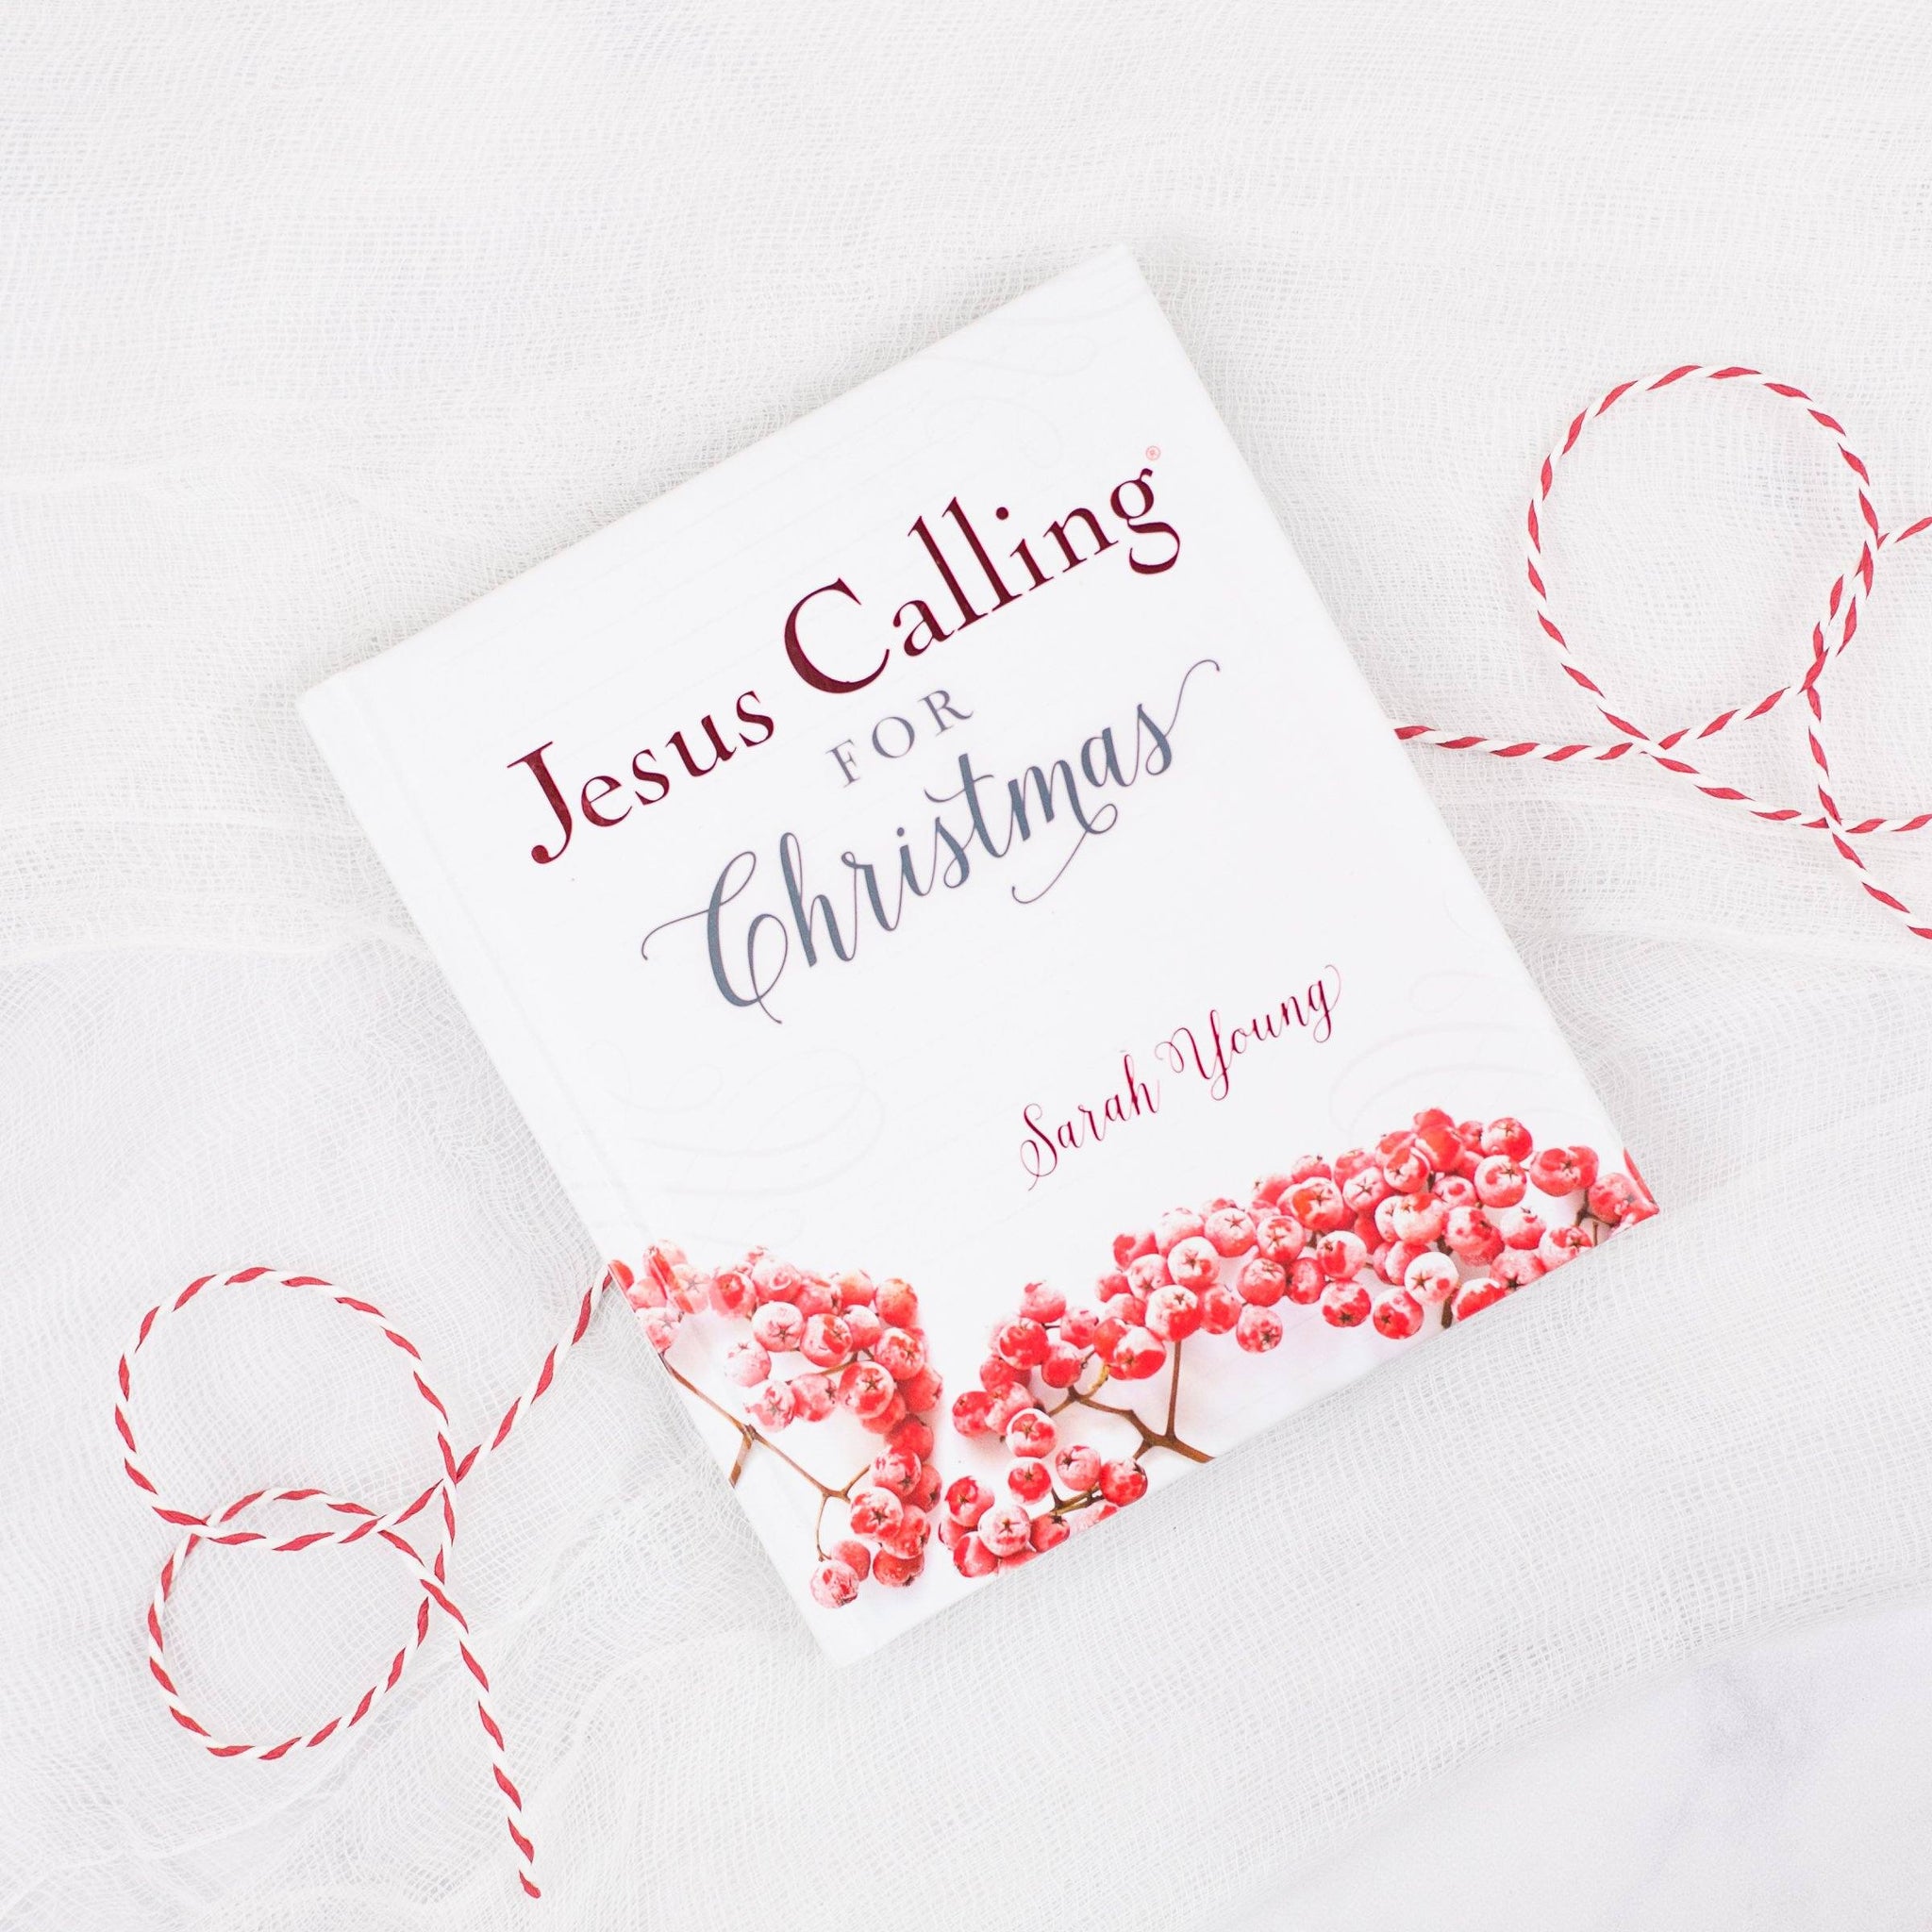 Jesus Calling for Christmas (hardcover)